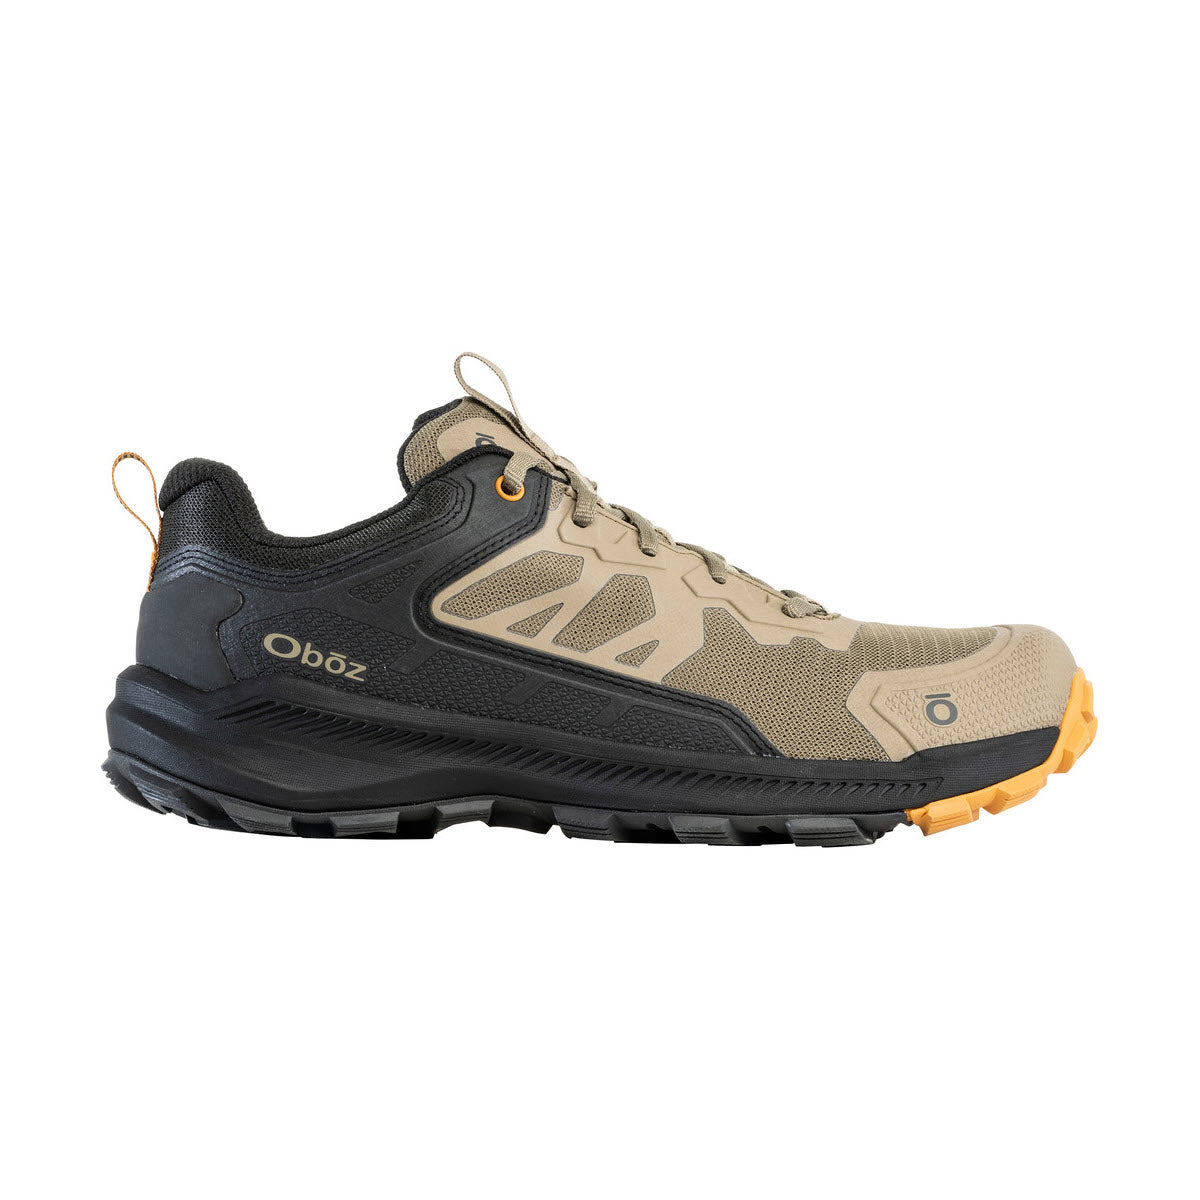 Side view of the gray and tan Oboz Katabatic Low Thicket hiking shoe with yellow accents on a white background.